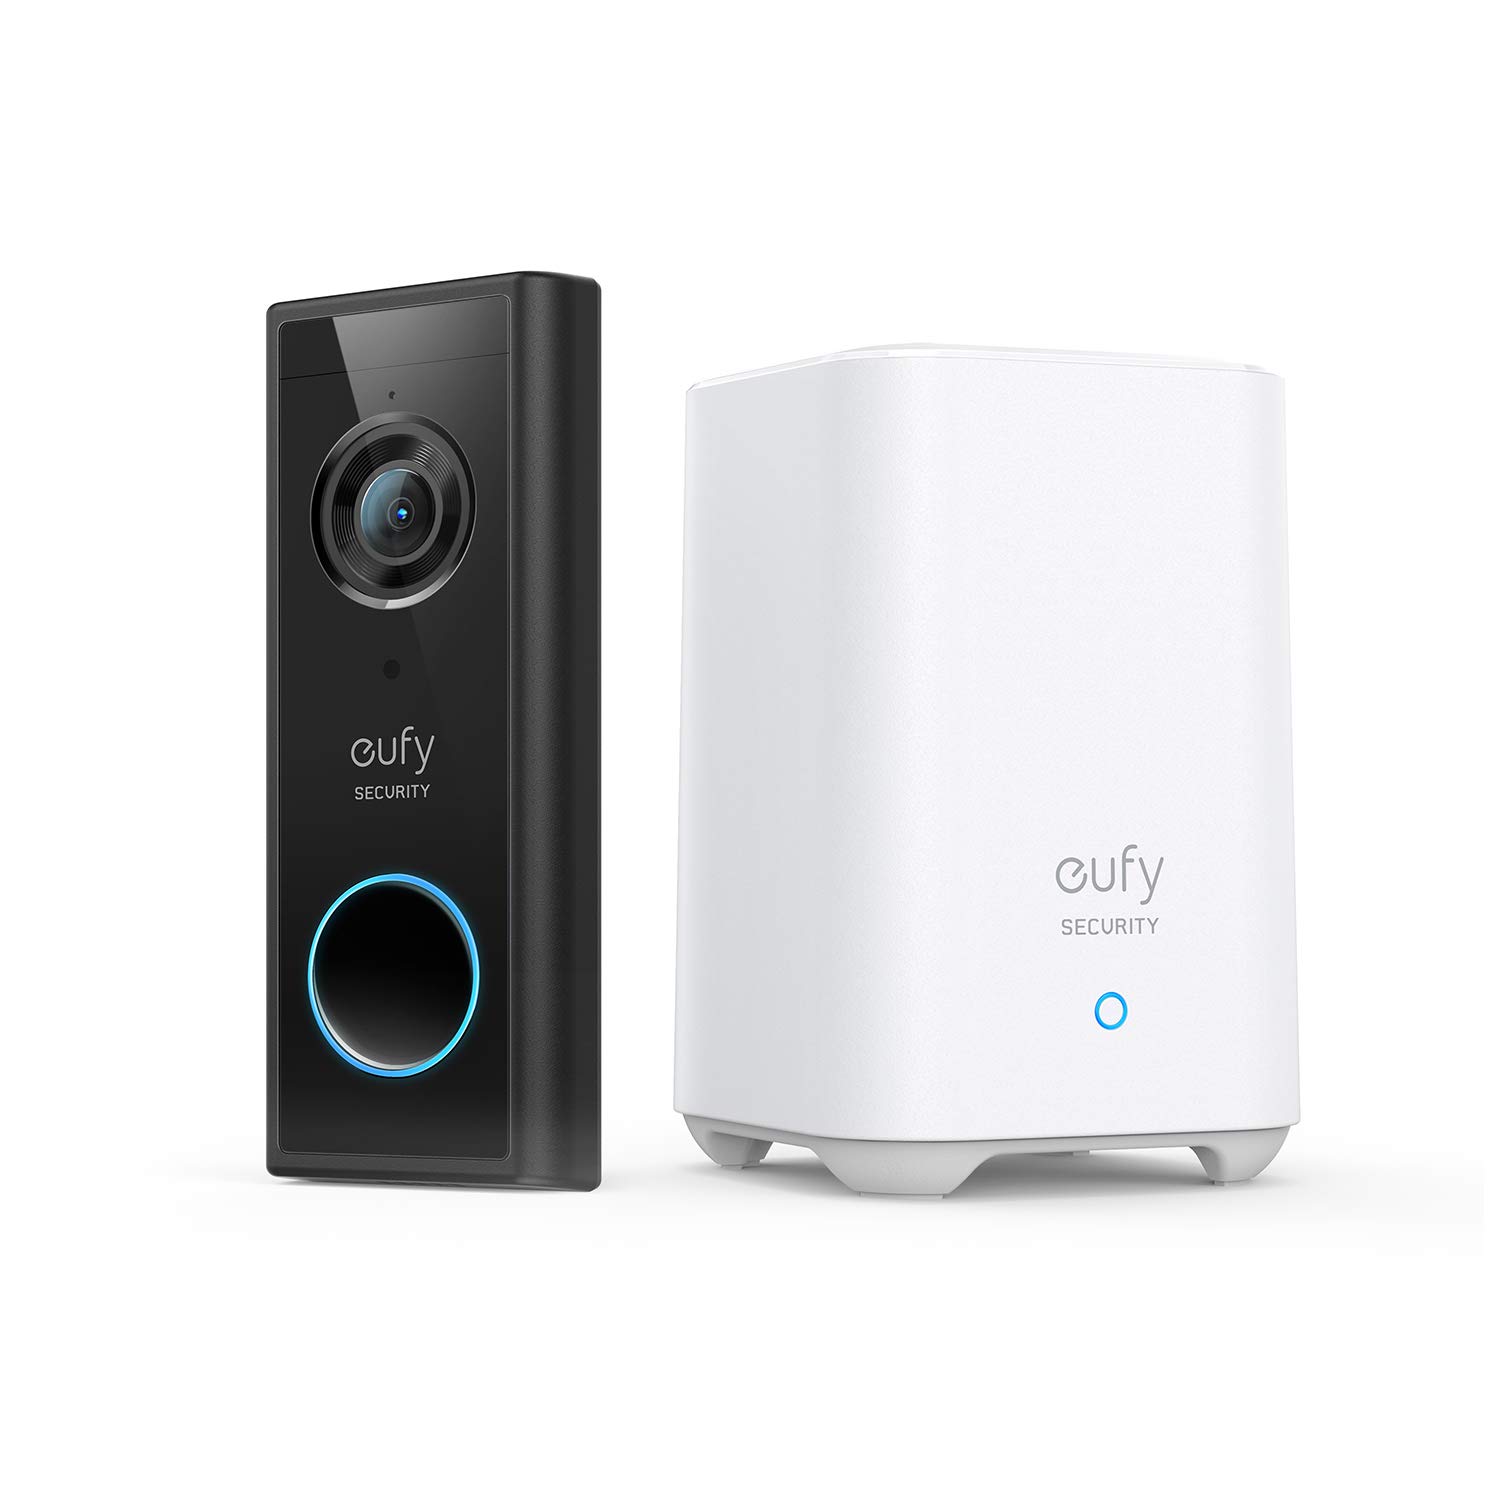 Prime Exclusive: eufy Security S220, Video Doorbell (Battery-Powered) Kit 2K Resolution $110 + Free Shipping